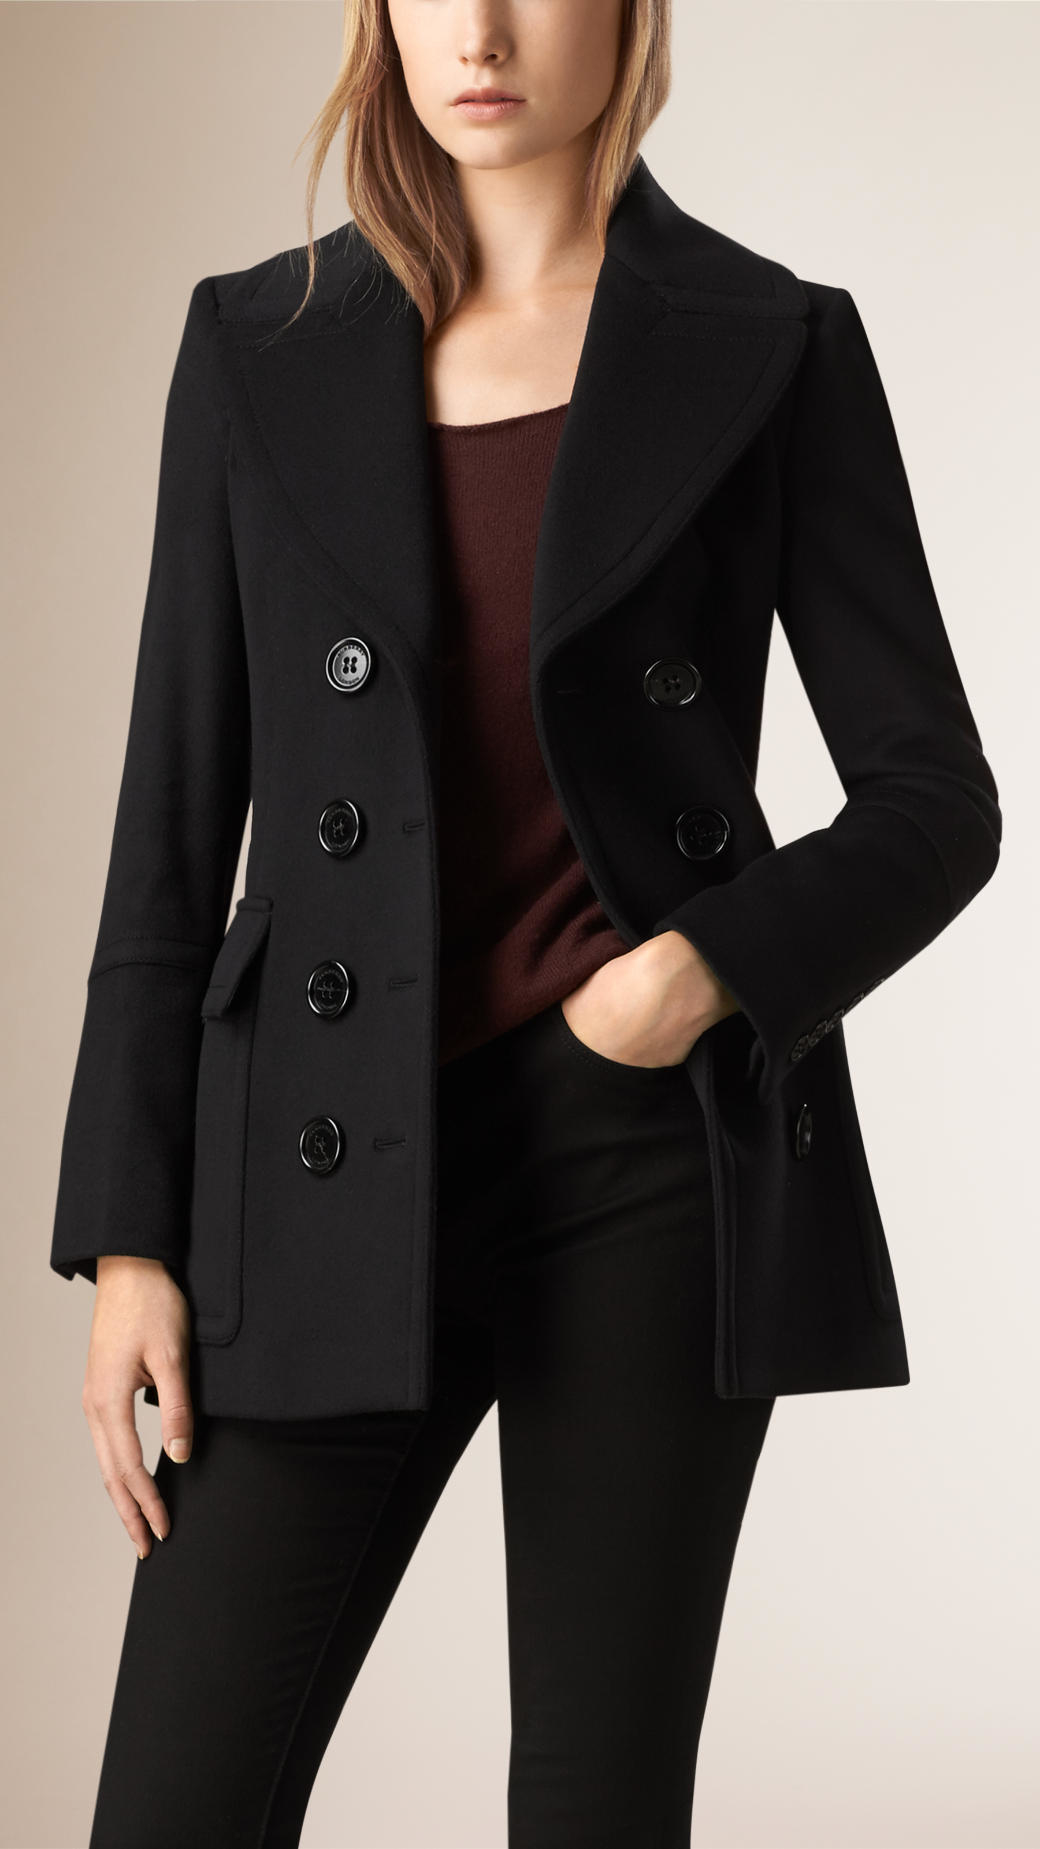 Burberry Wool Cashmere Pea Coat in Black - Lyst